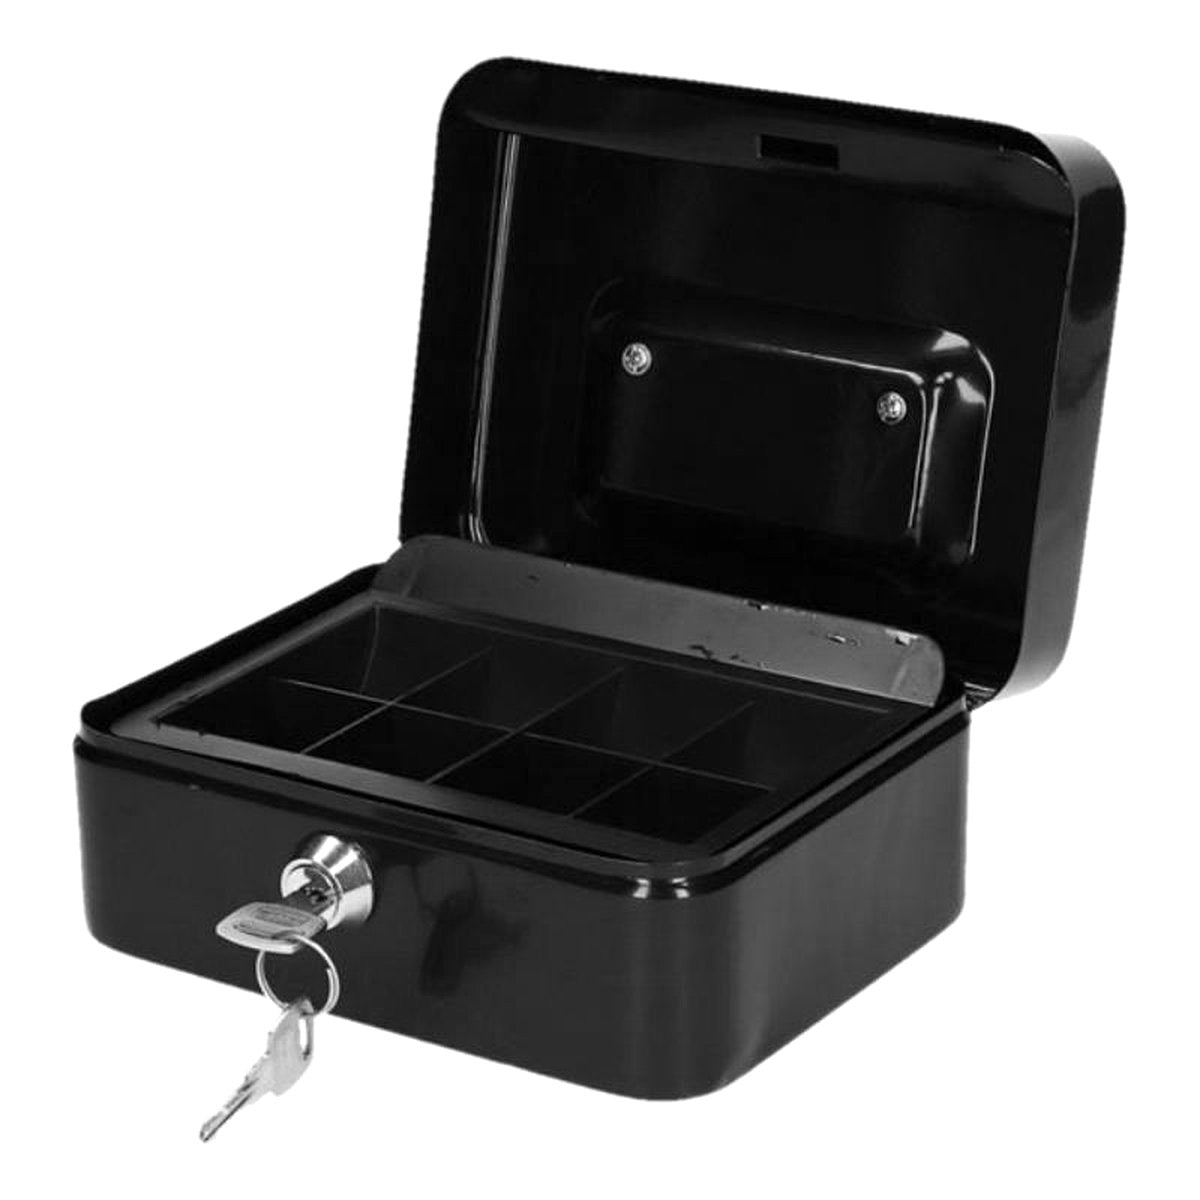 Cash box with lock - Box with handle - 20 x 15 x 7 cm - Black - With insert drawer - Metal - Safe